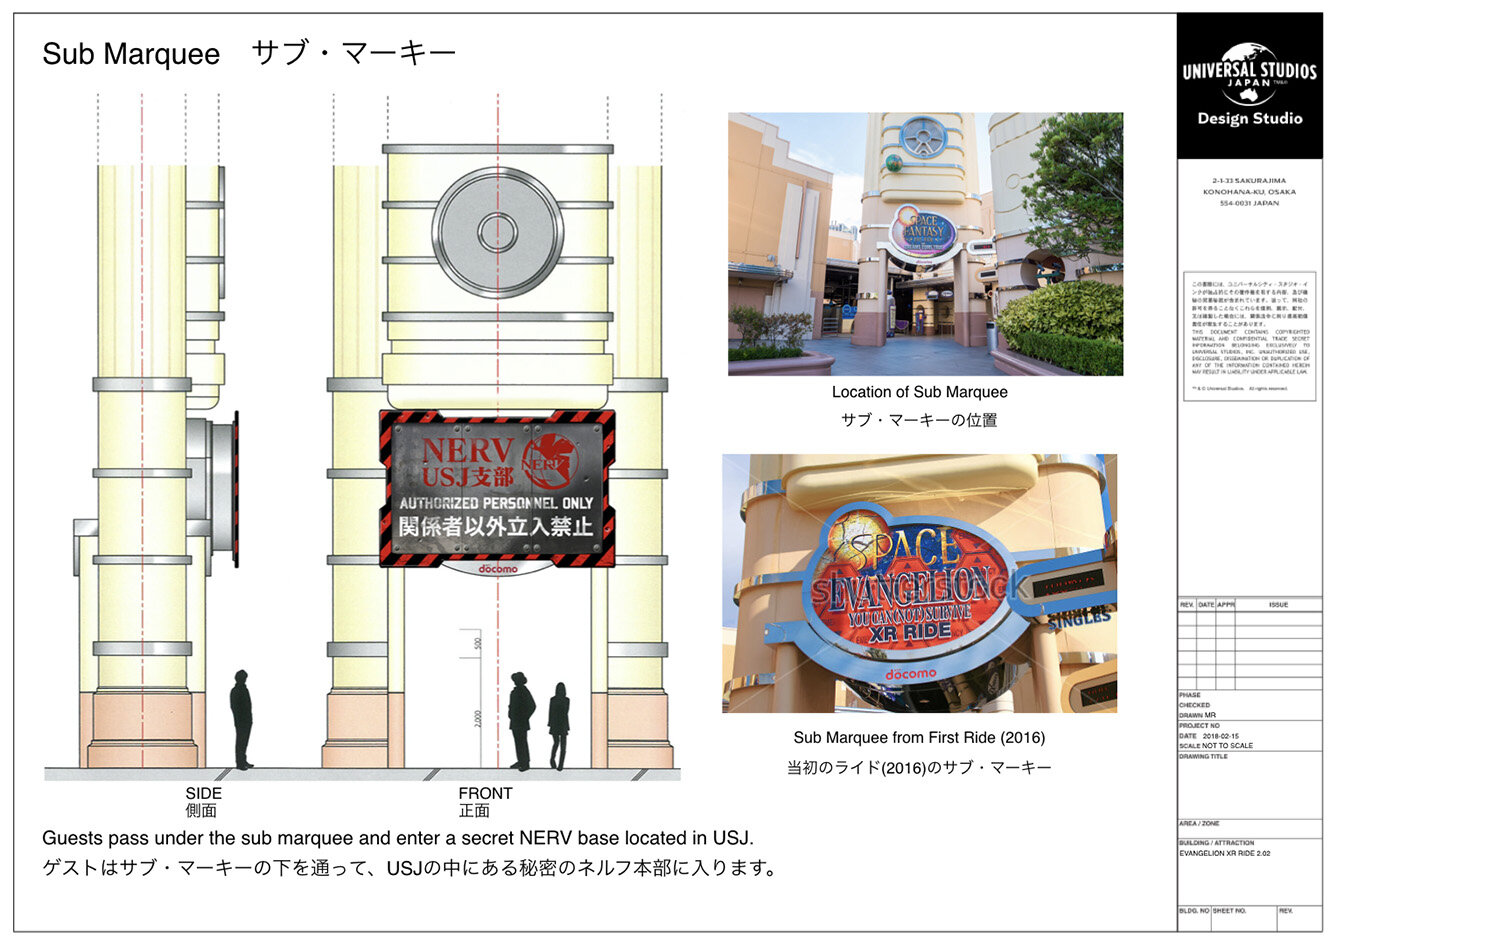  Scale drawing and creative concept for attraction sub marquee 